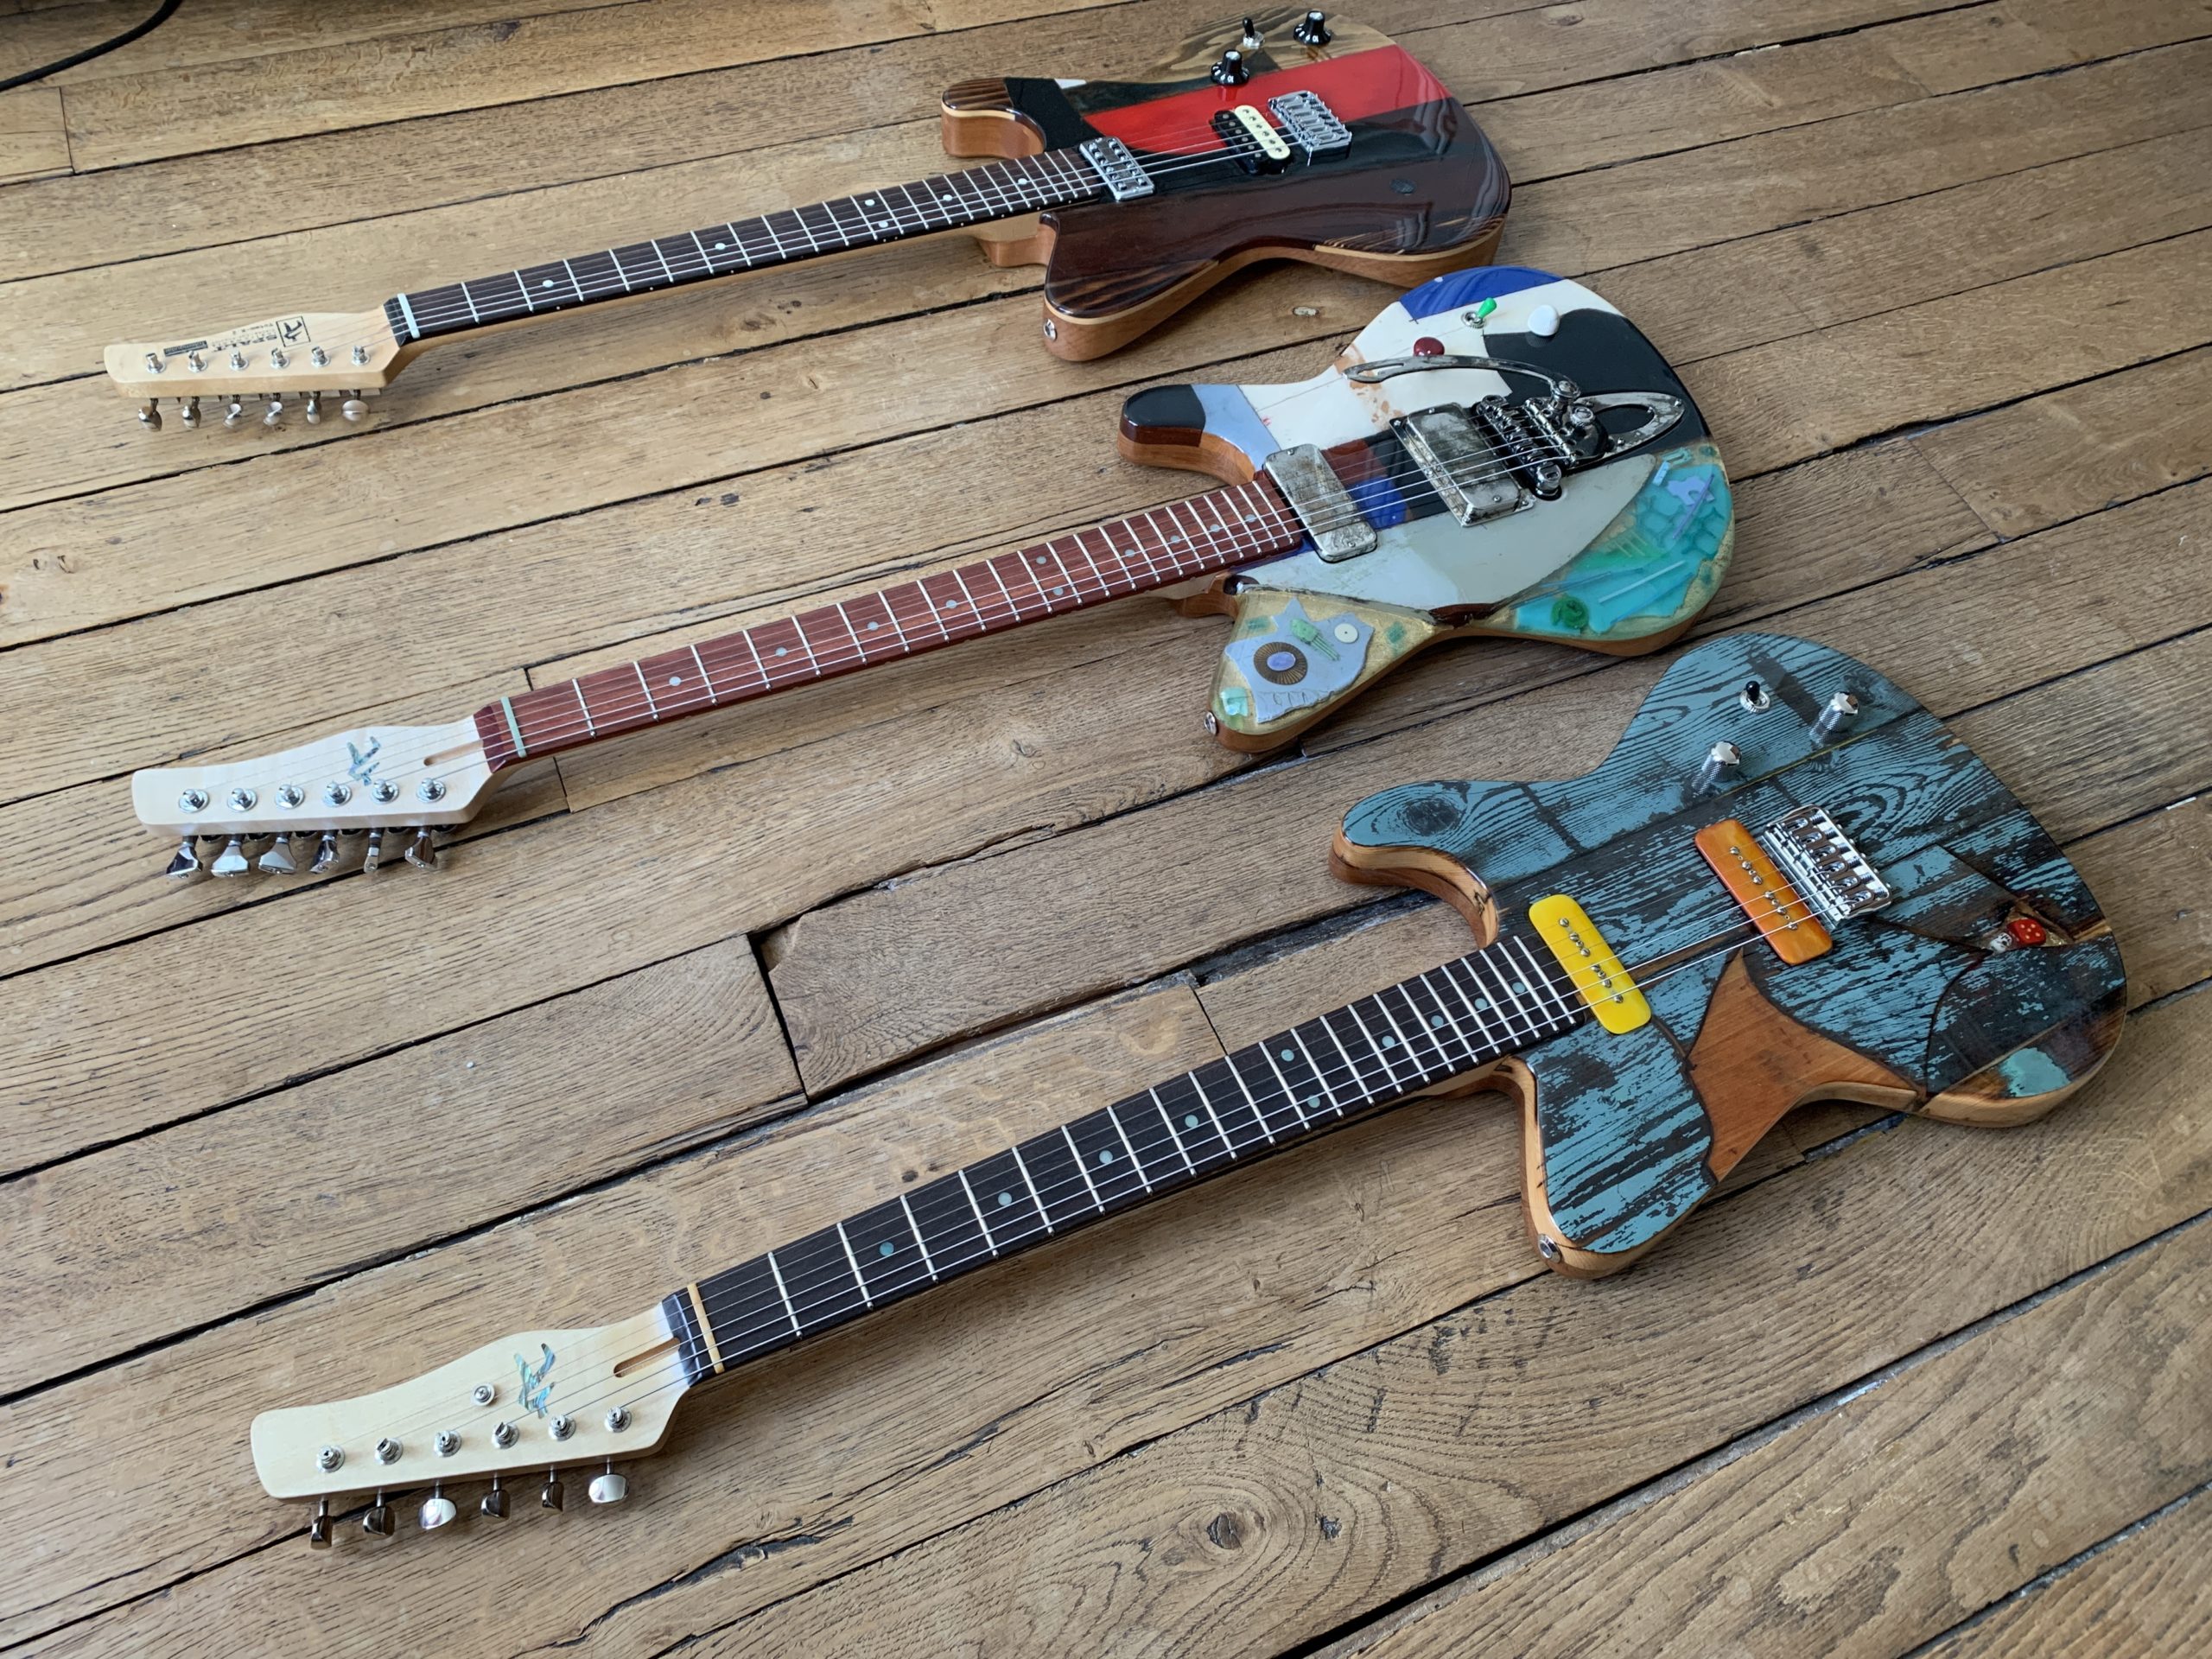 Featured in the showroom: 3 Spalt Instruments guitars by luthier Michael Spalt